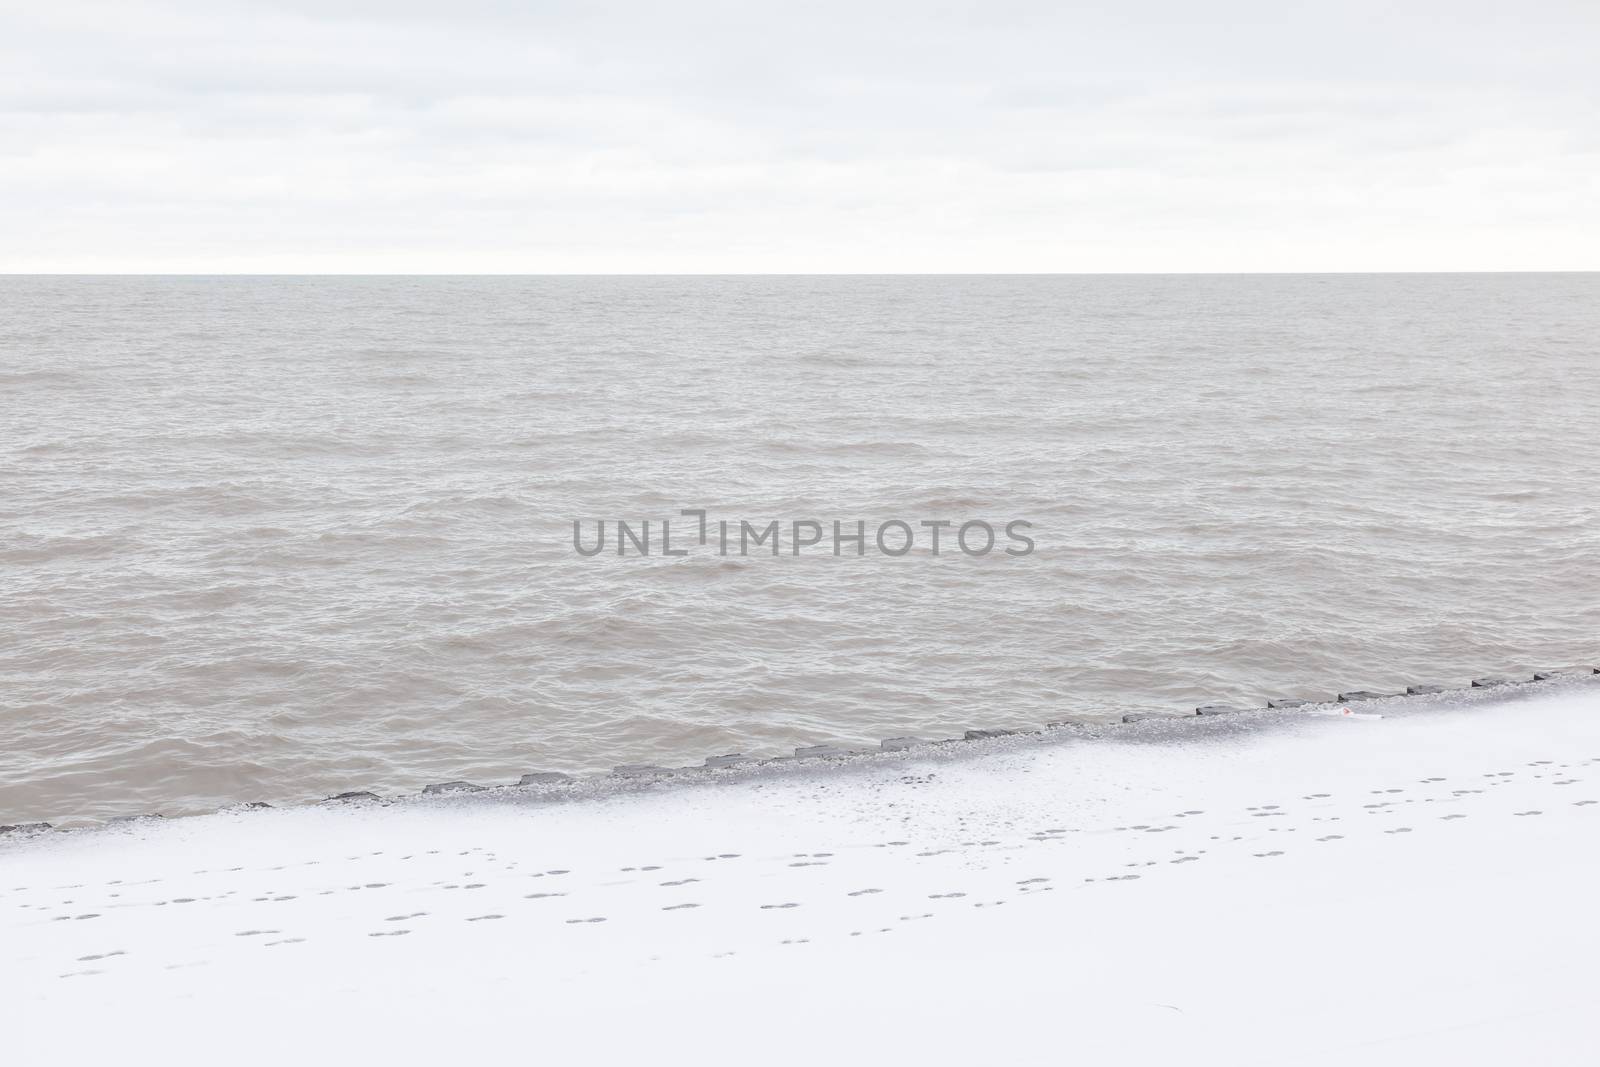 Snow on Christmas day in Chicago near Lake Michigan shore.